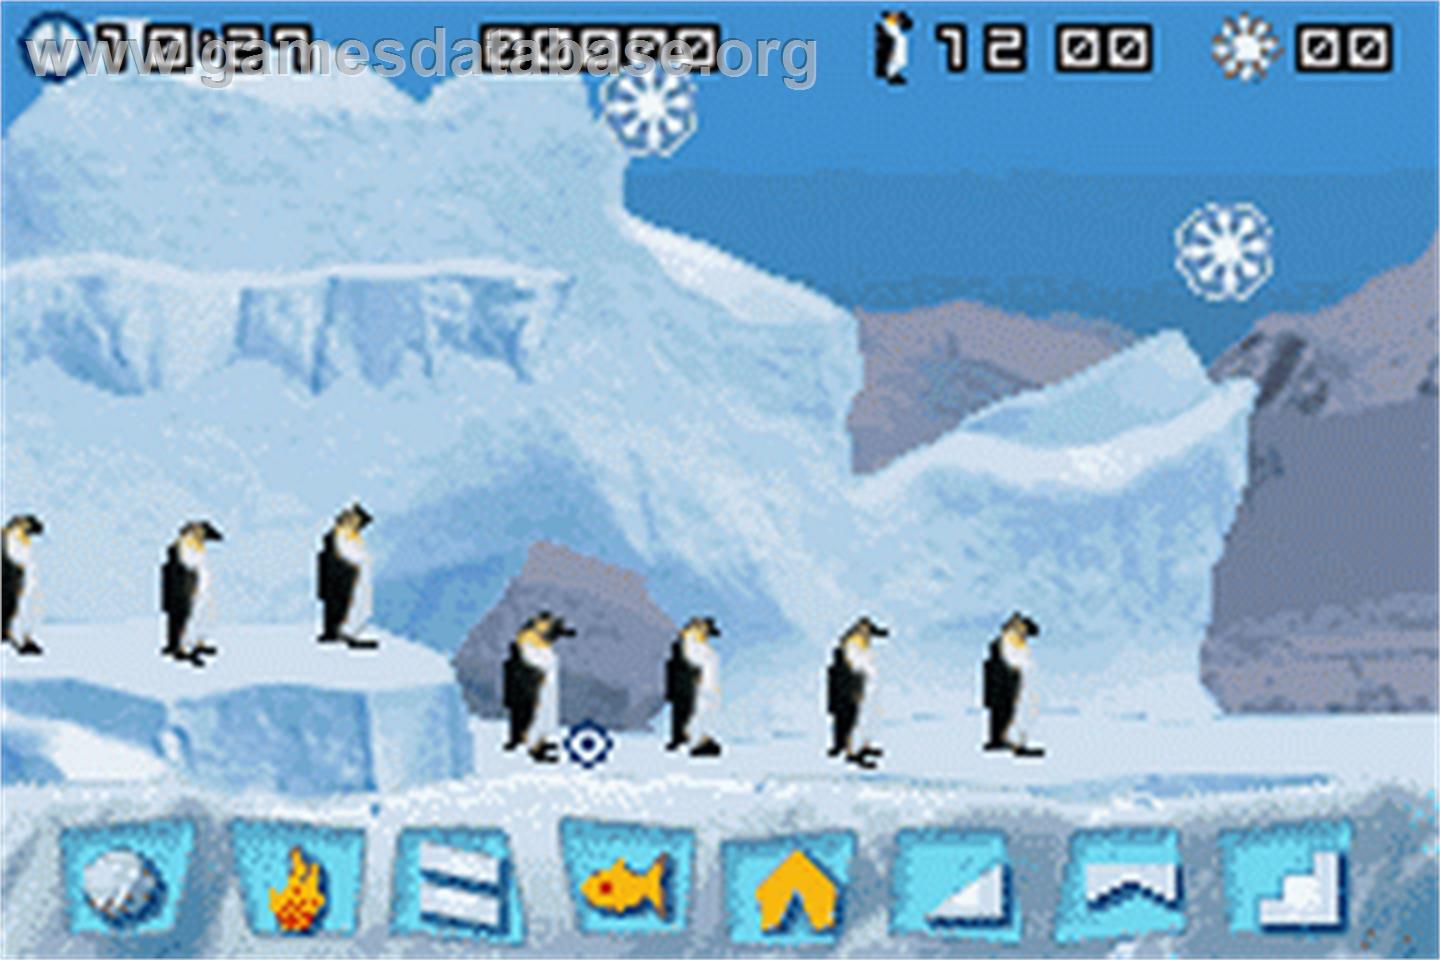 March of the Penguins - Nintendo Game Boy Advance - Artwork - In Game